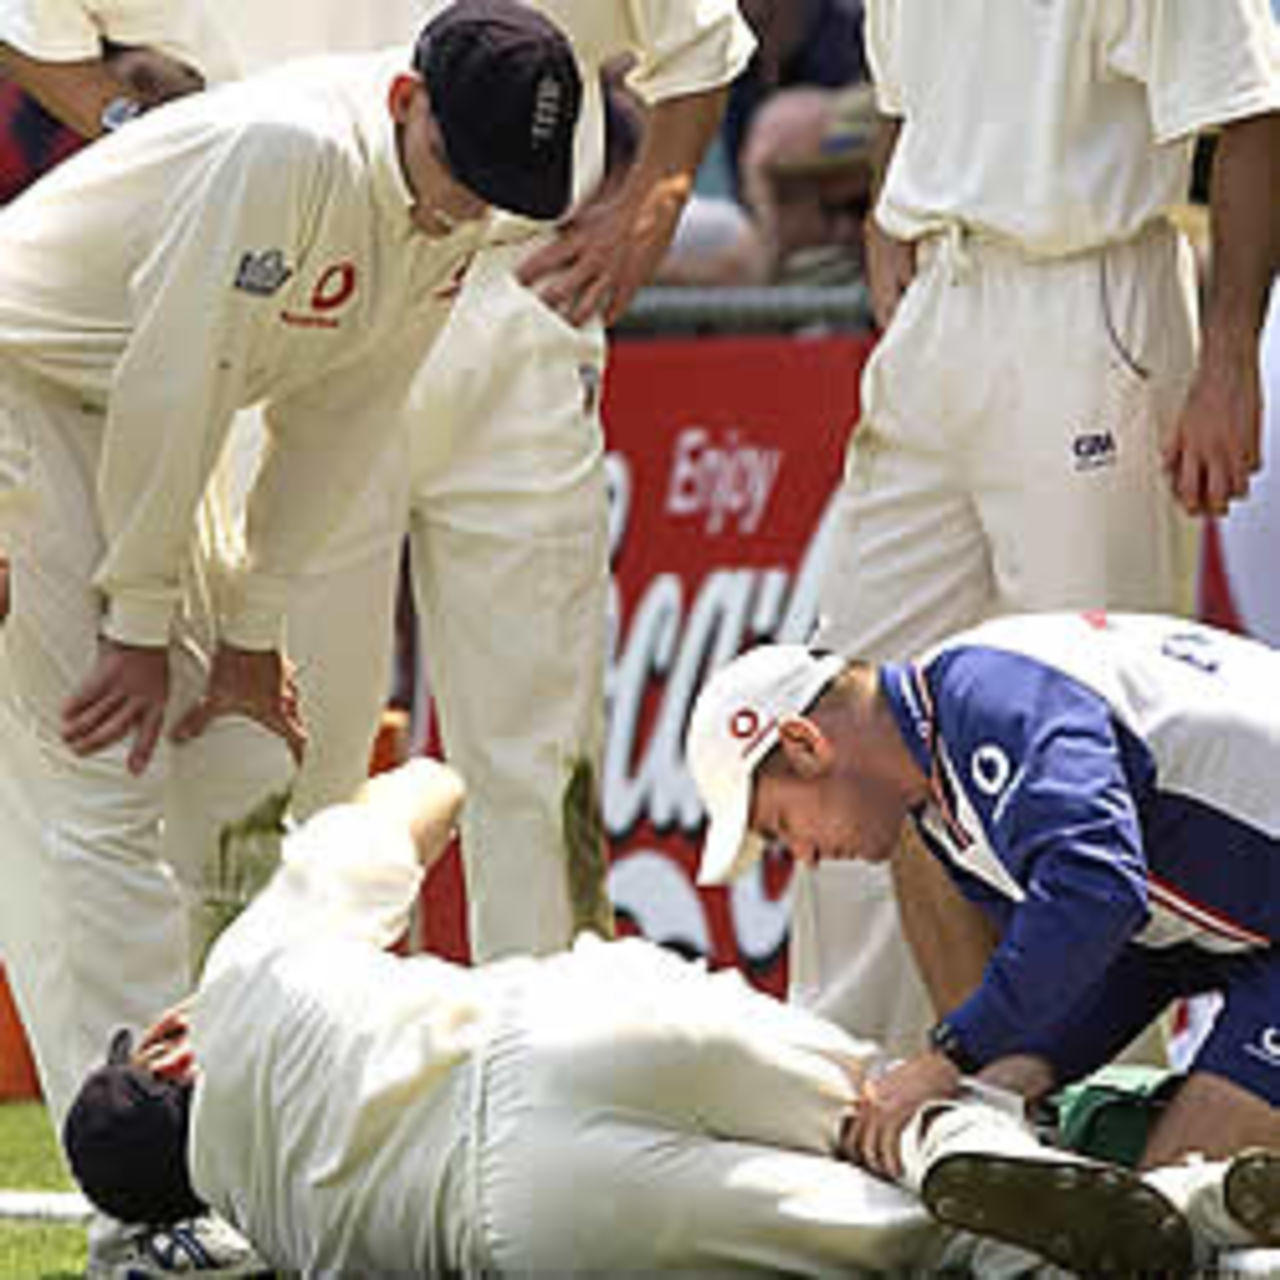 BRISBANE - NOVEMBER 7: England team physiotherapist, Kirk Russel attends to the injured leg of Simon Jones during day one of the first Ashes Test between Australia and England at the Gabba, Brisbane, Australia on November 7, 2002.